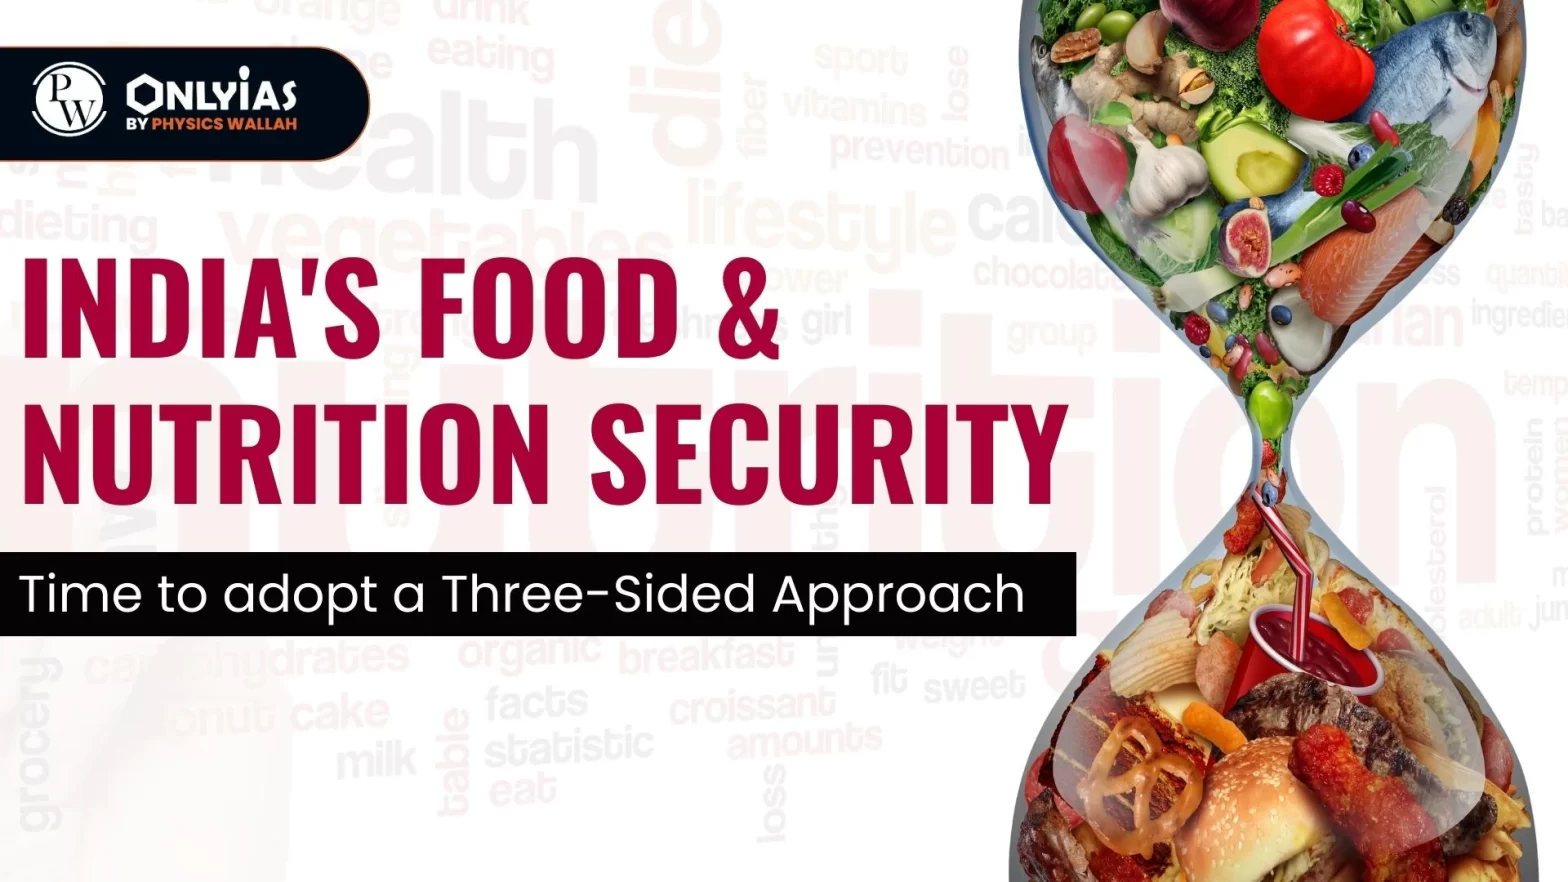 India’s Food & Nutrition Security: Time to adopt a Three-Sided Approach